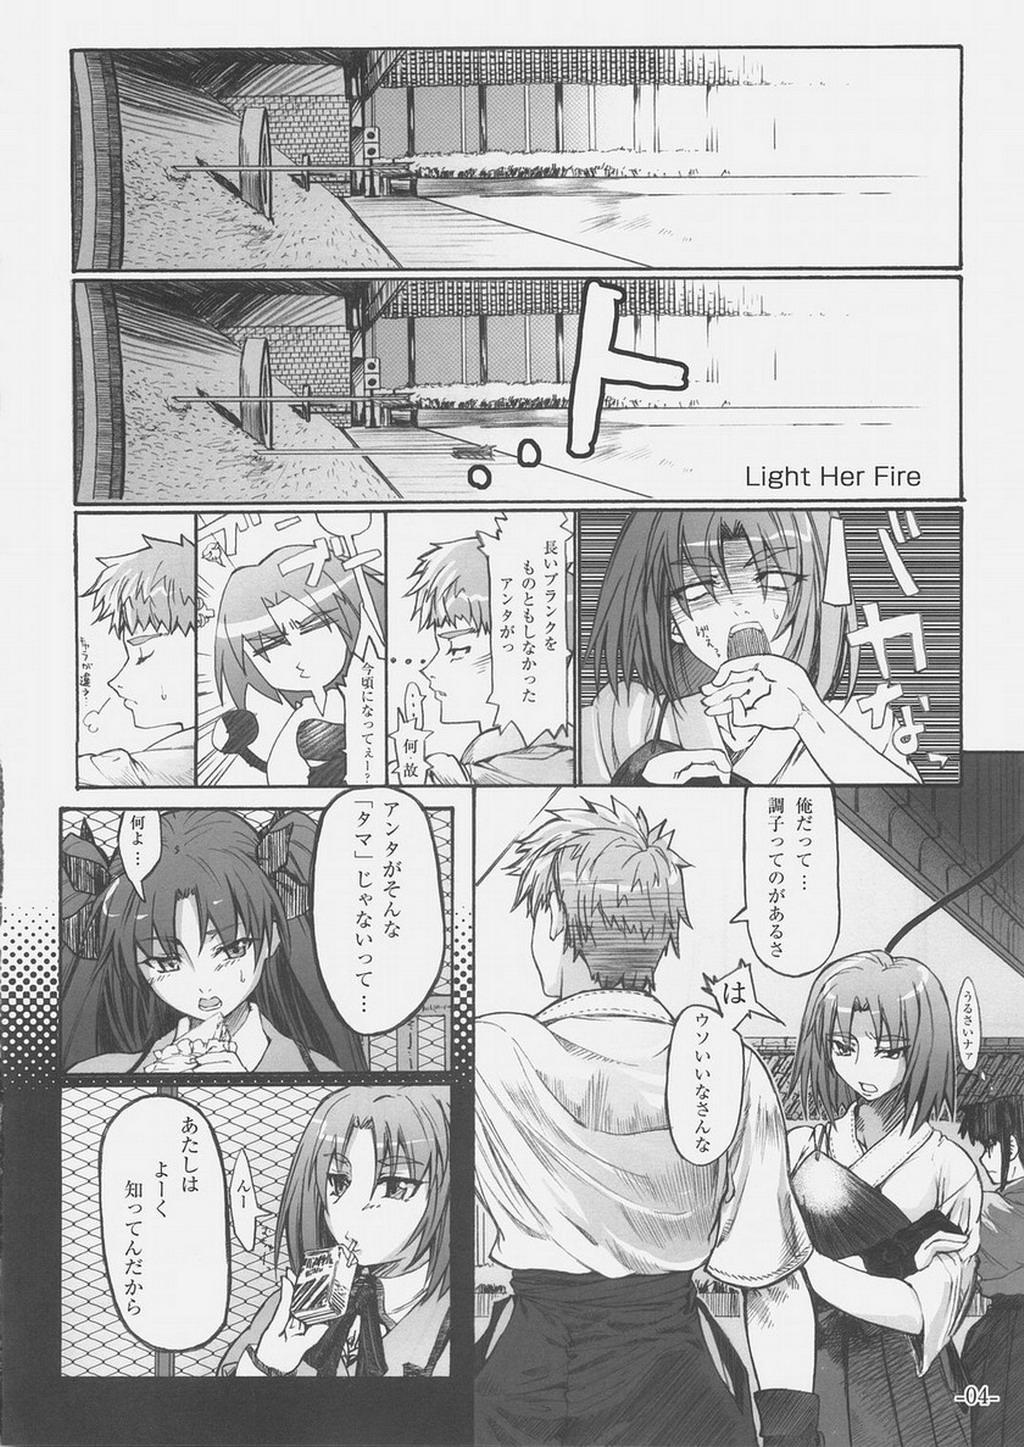 Anal Sex Light Her Fire! - Fate stay night Lesbiansex - Page 3